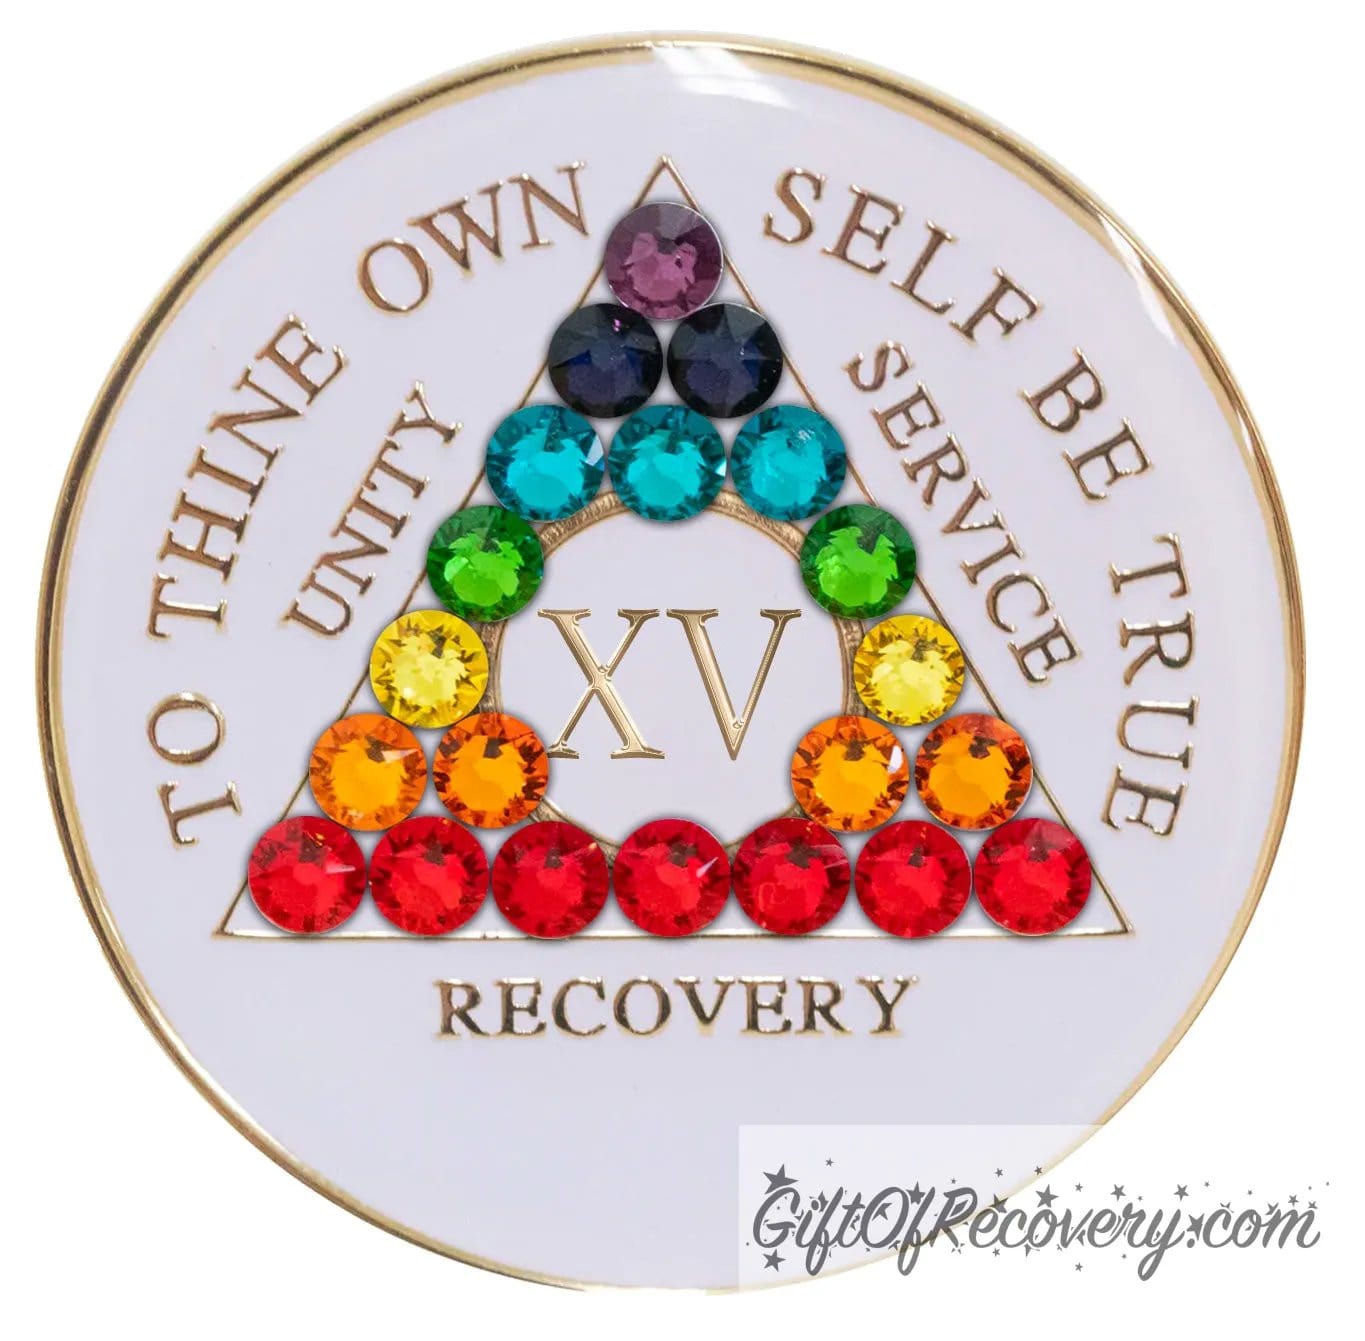 Sobriety Chip AA Chakra Bling Crystallized White Triplate 15 Years